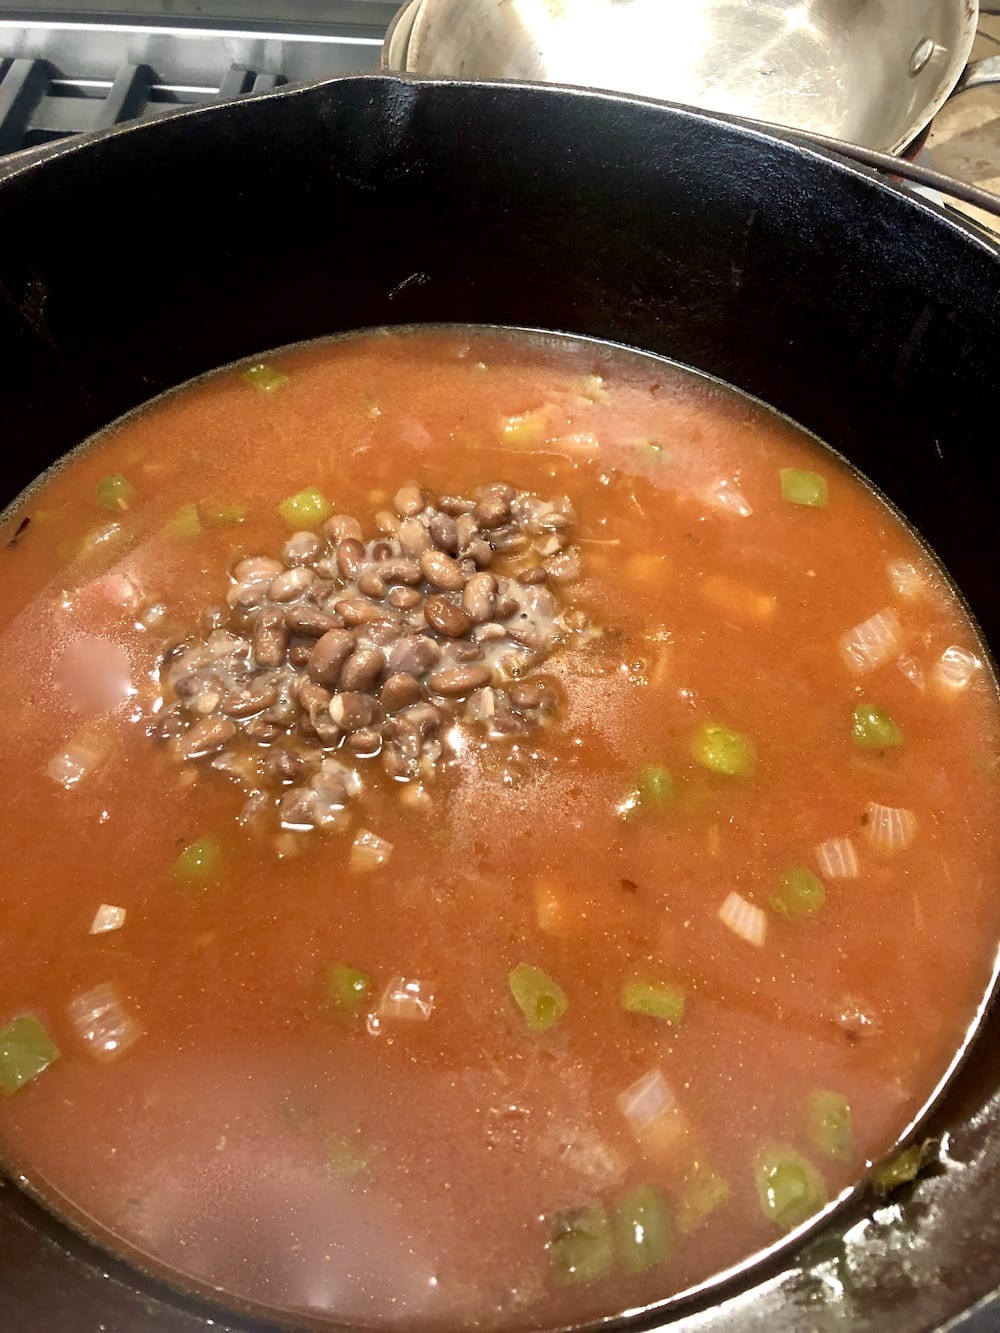 pinto beans in tomato broth with vegetables for chili in cast iron dutch oven